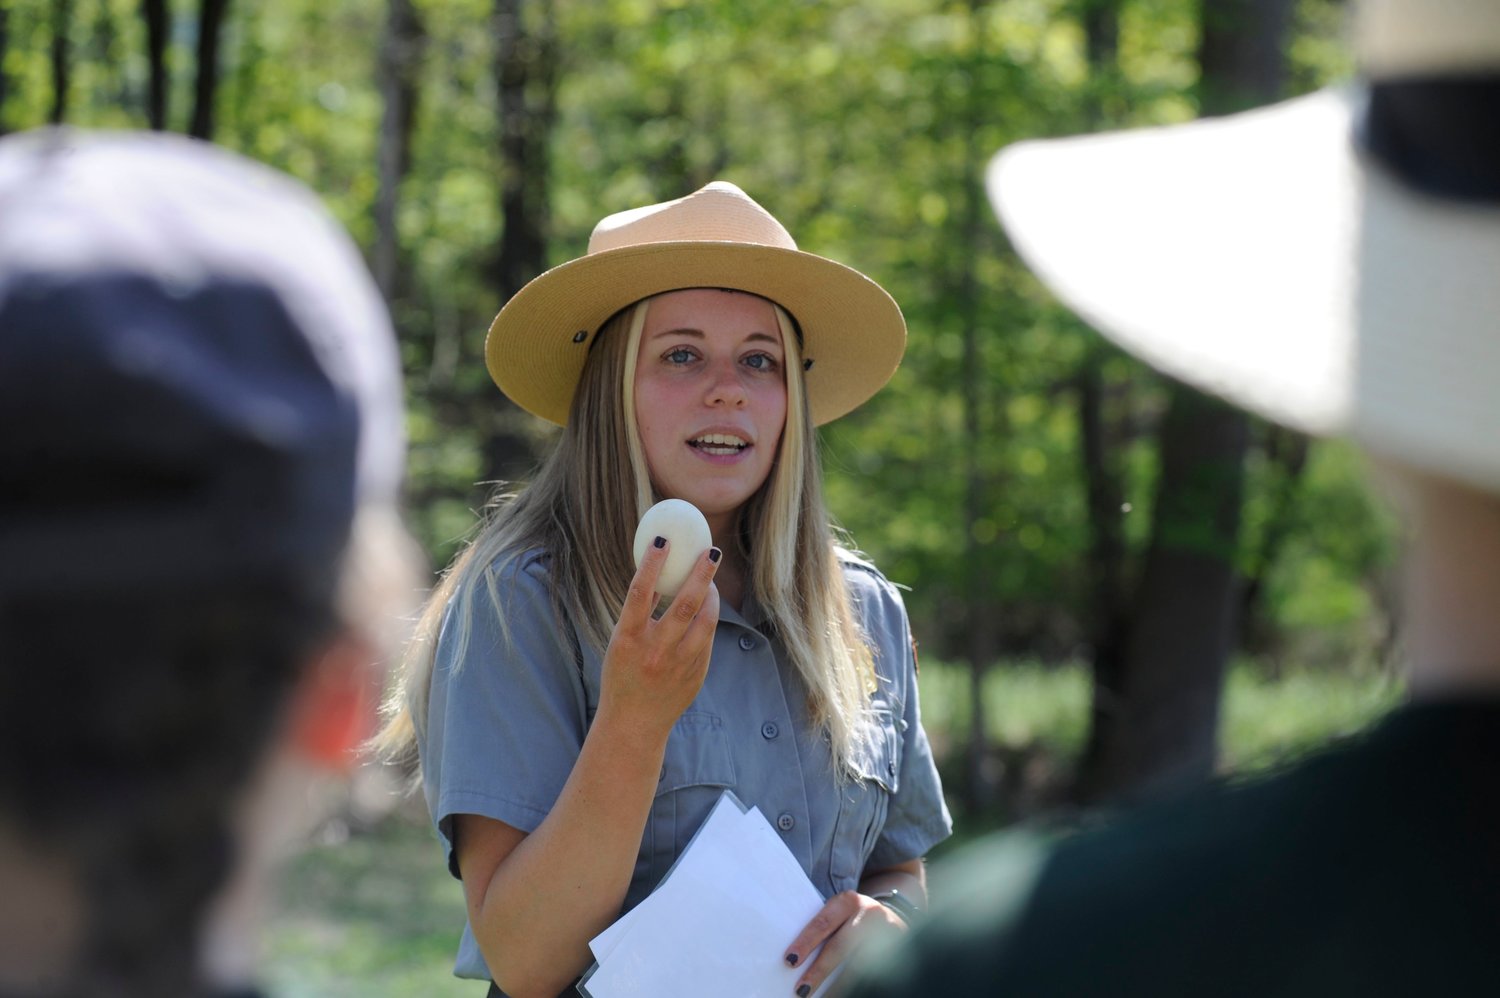 National Park Service interpretive ranger Payten Nekich talked to the kids about eagles in the Upper Delaware Scenic and Recreational River, and how the eagles relate to native brook trout.